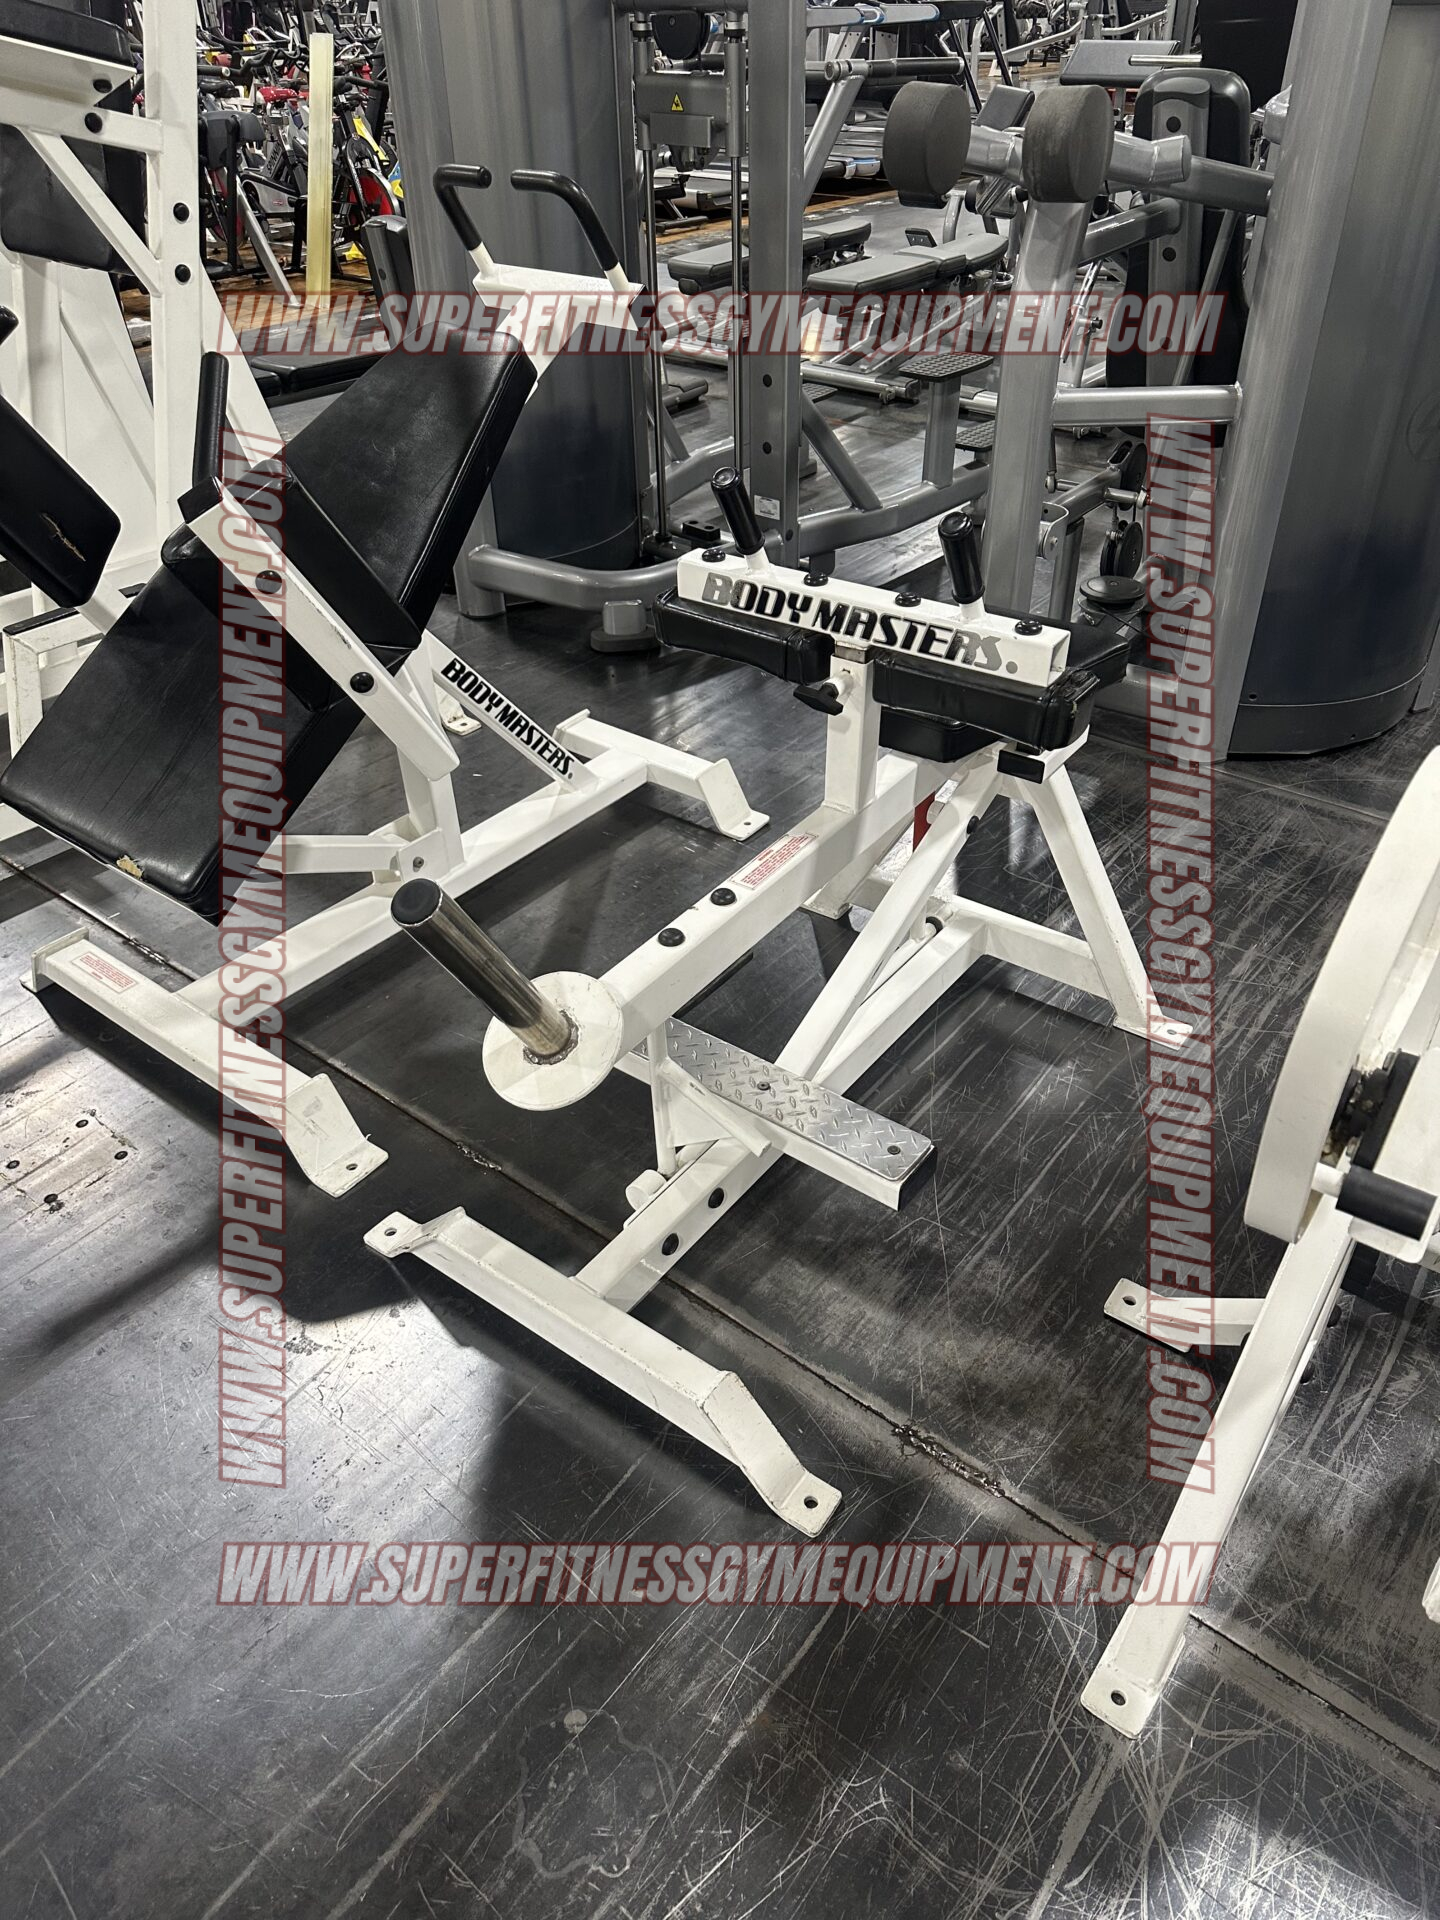 Complete BodyMasters Complete Gym Package - Superfitness Gym Equipment